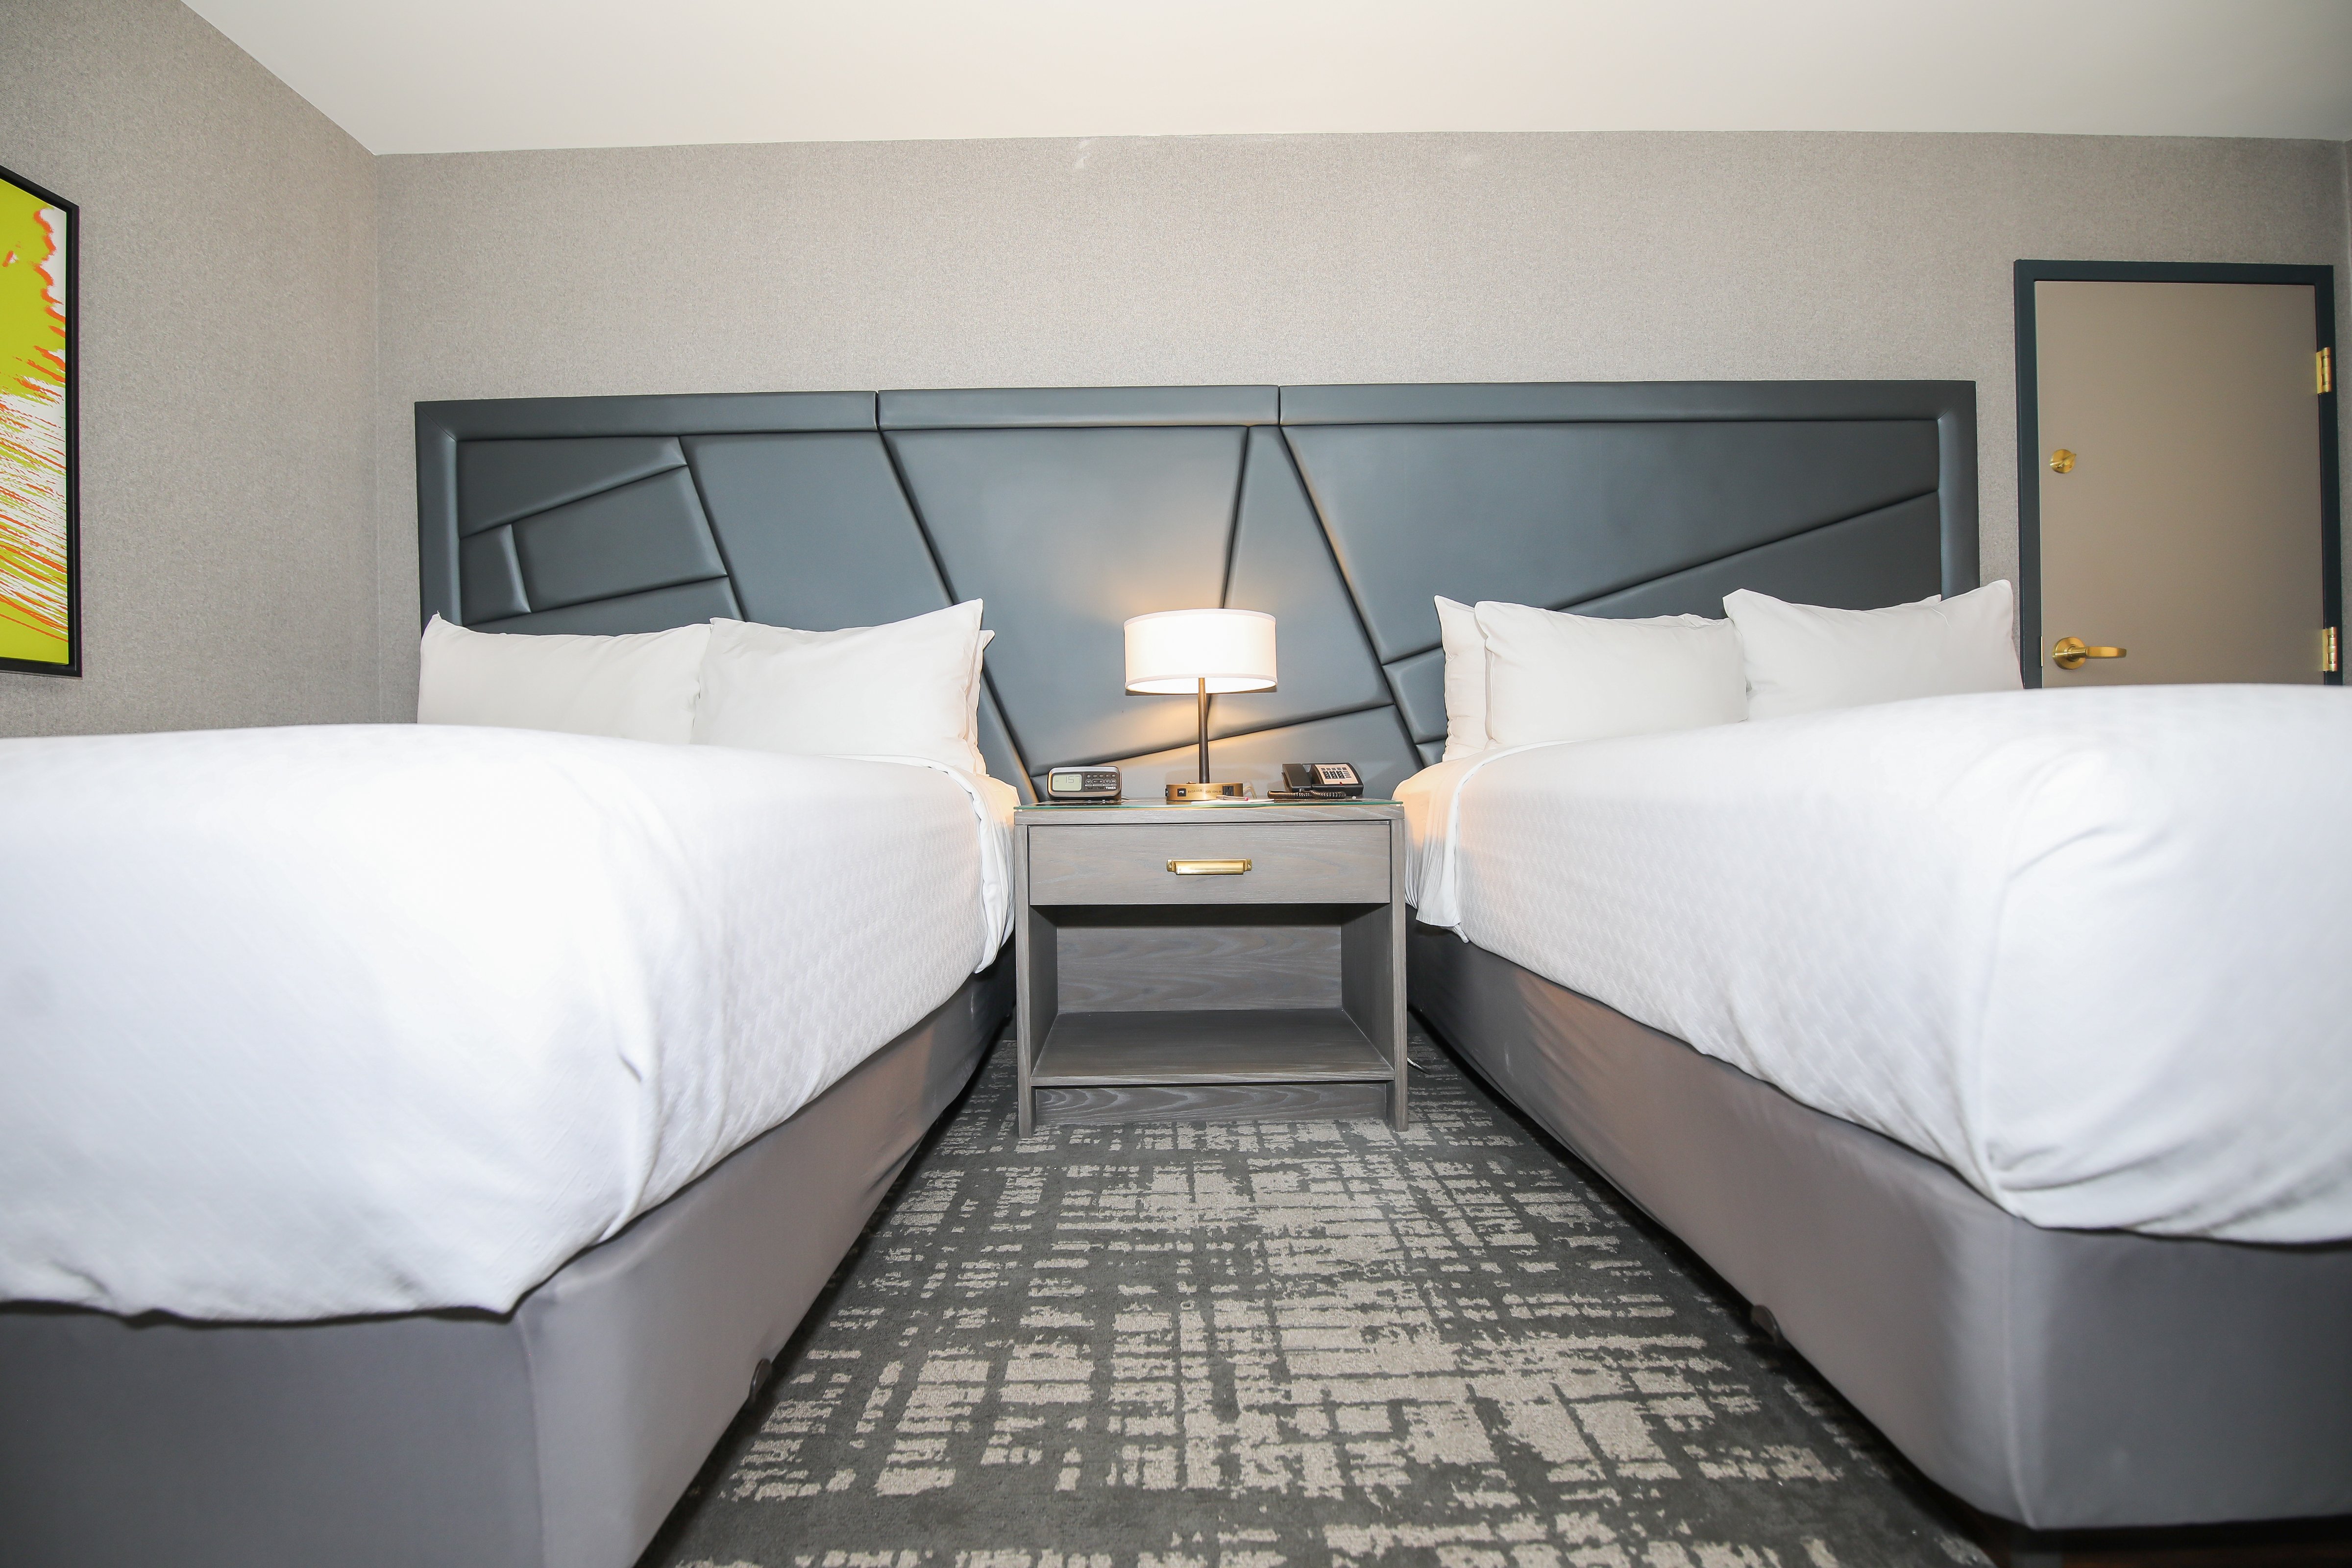 Double the beds, double the comfort!